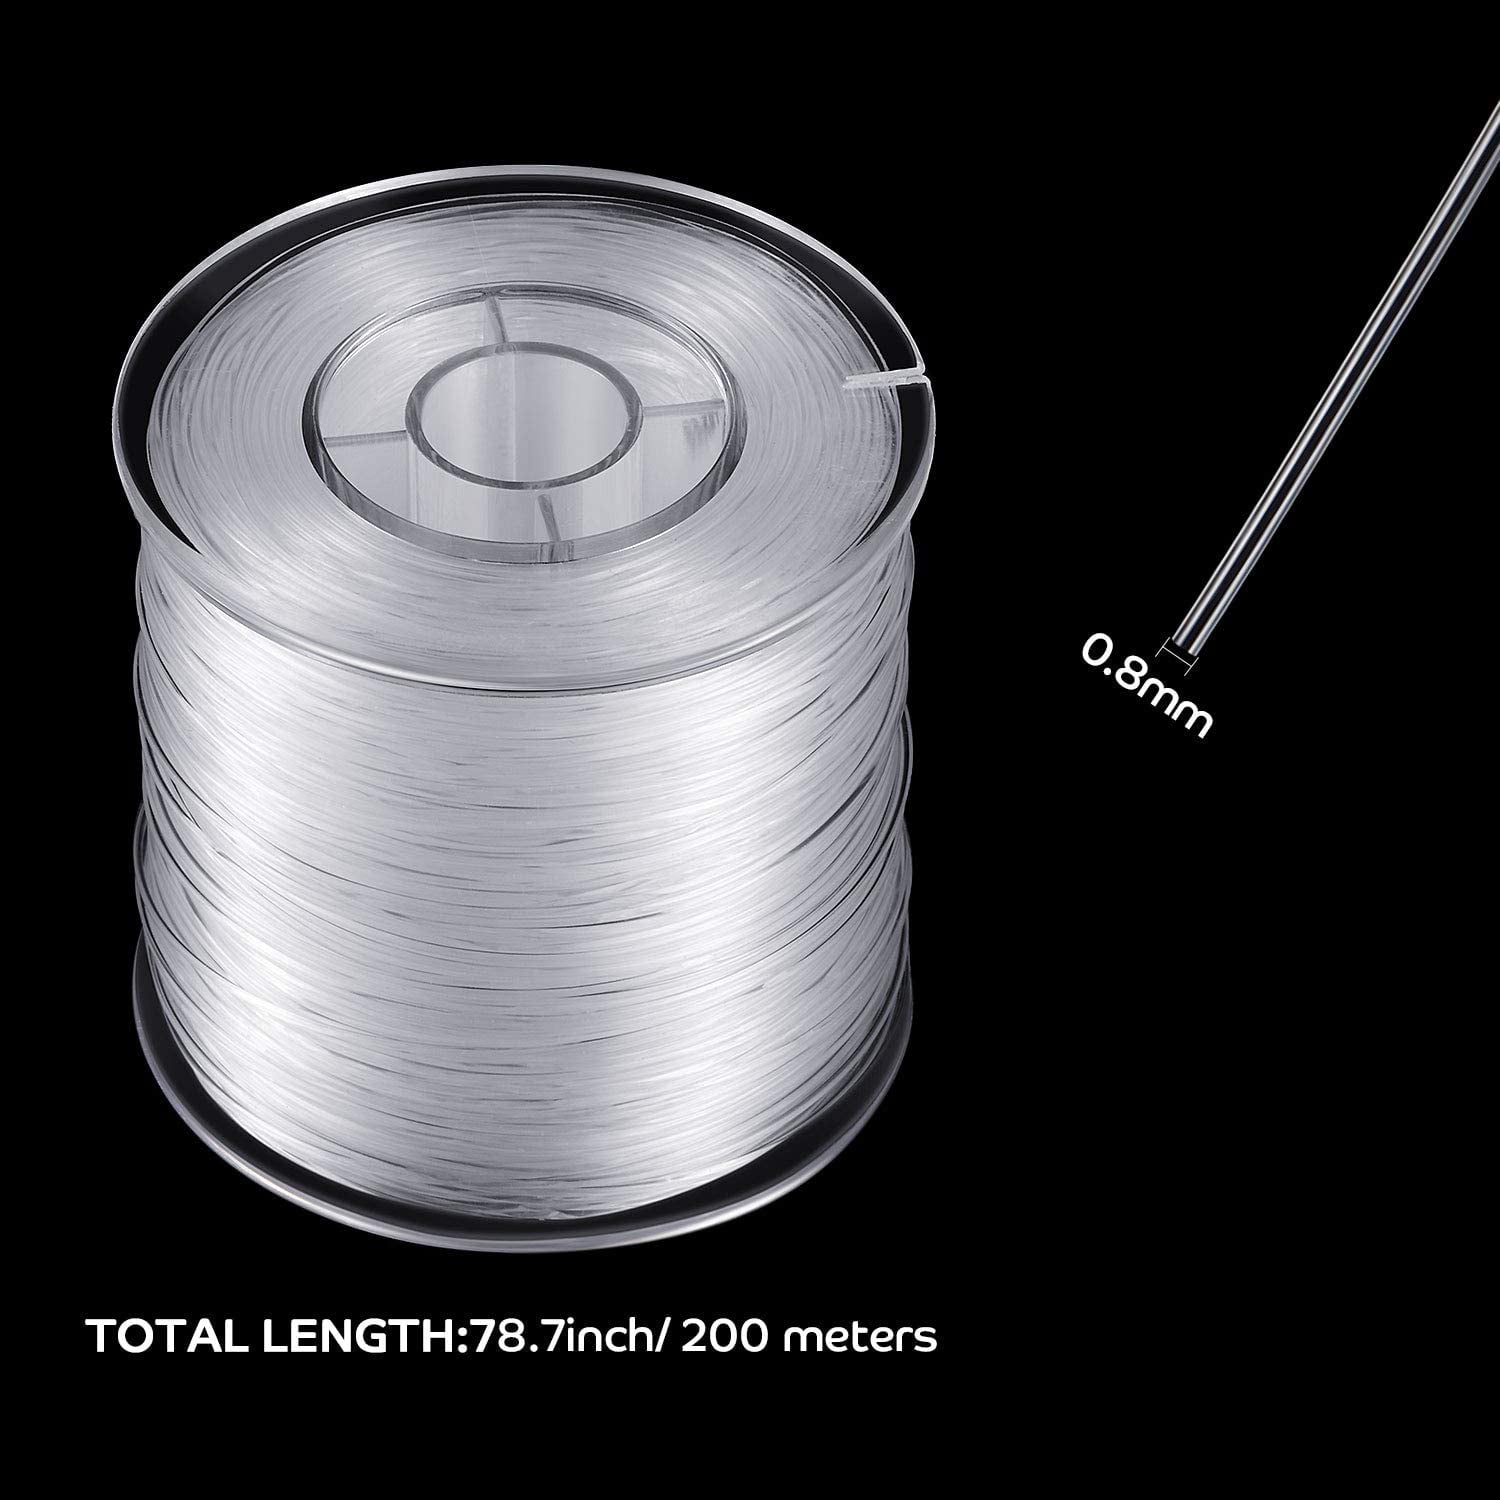 100 m/ 109.4 Yards Clear Invisible Hanging Wire Supports Up to 50 Pounds Strong Clear Nylon Thread for Beading Sewing Quilting Hanging Ornaments with about 50 Pieces Aluminum Crimping Loop Sleeve